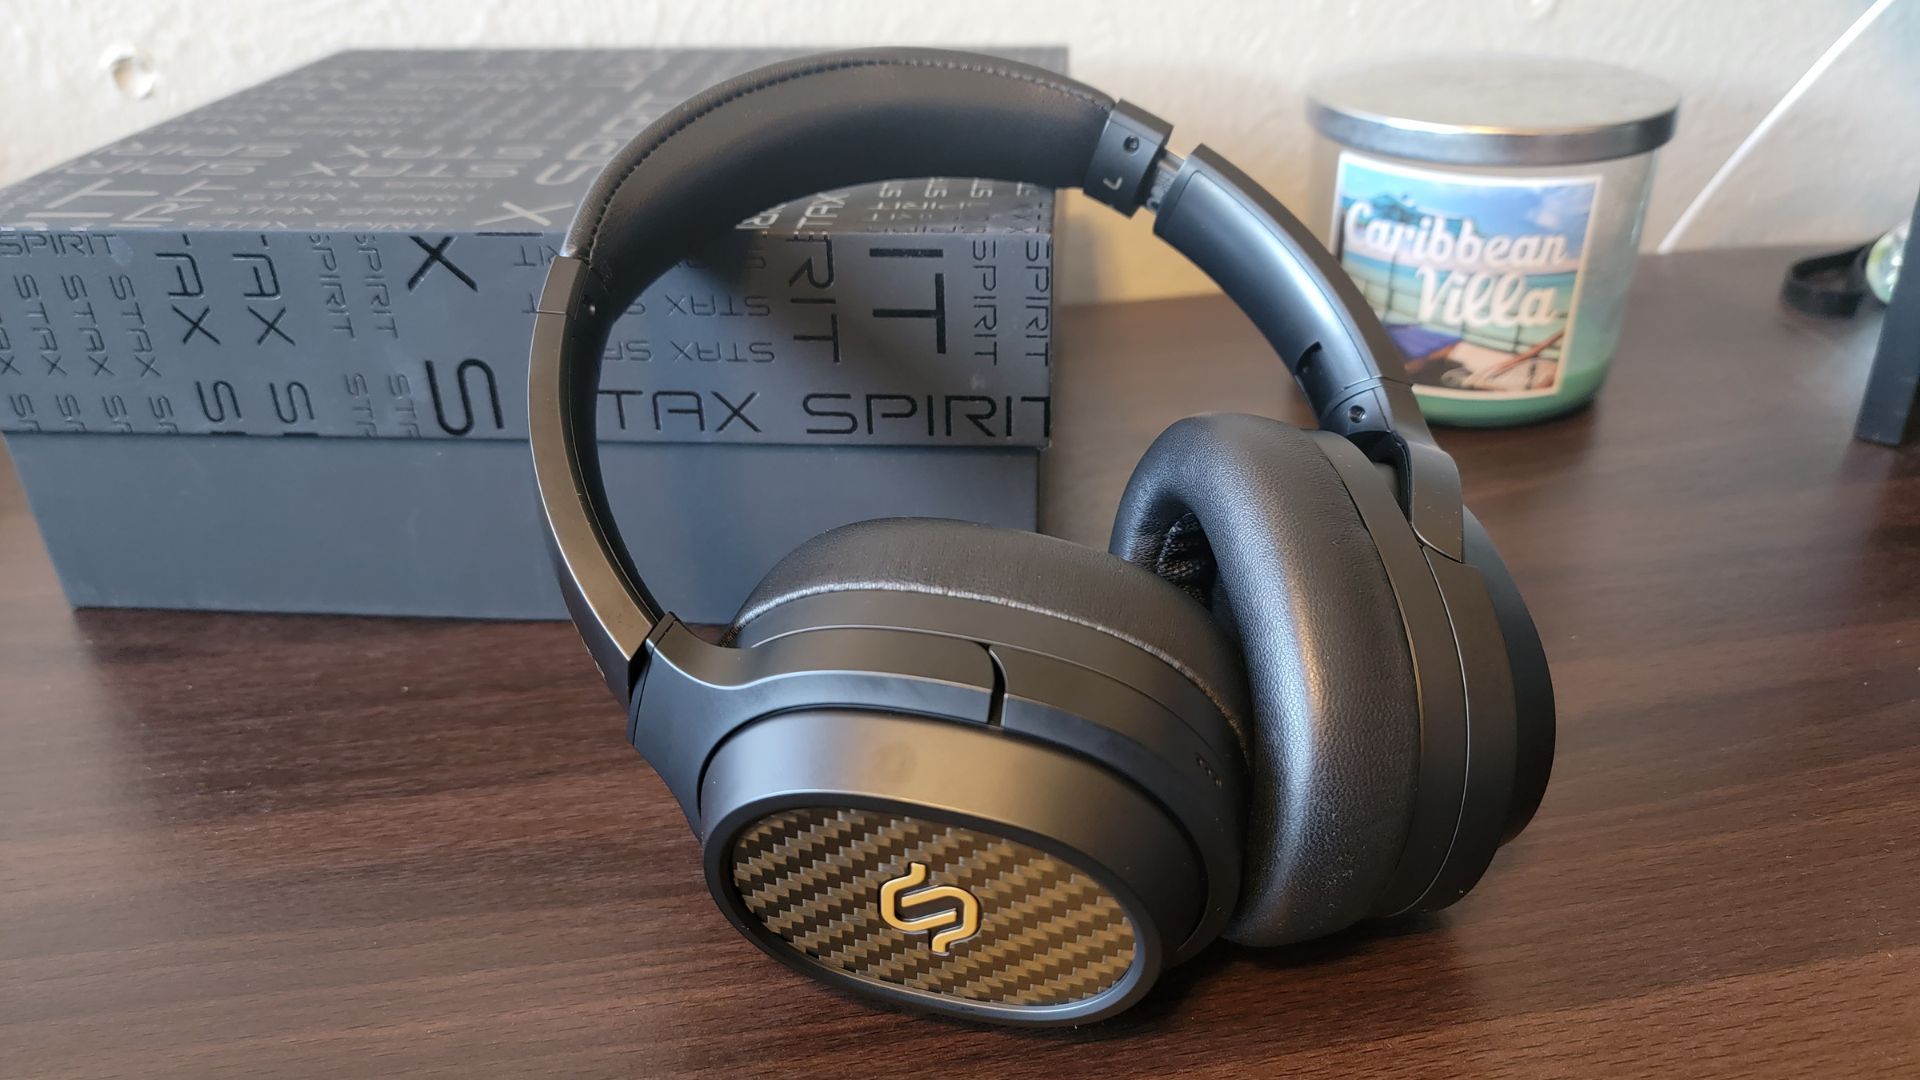 edifier stax spirit s3 planar magnetic headphones propped up on the box it came in on a wooden desk